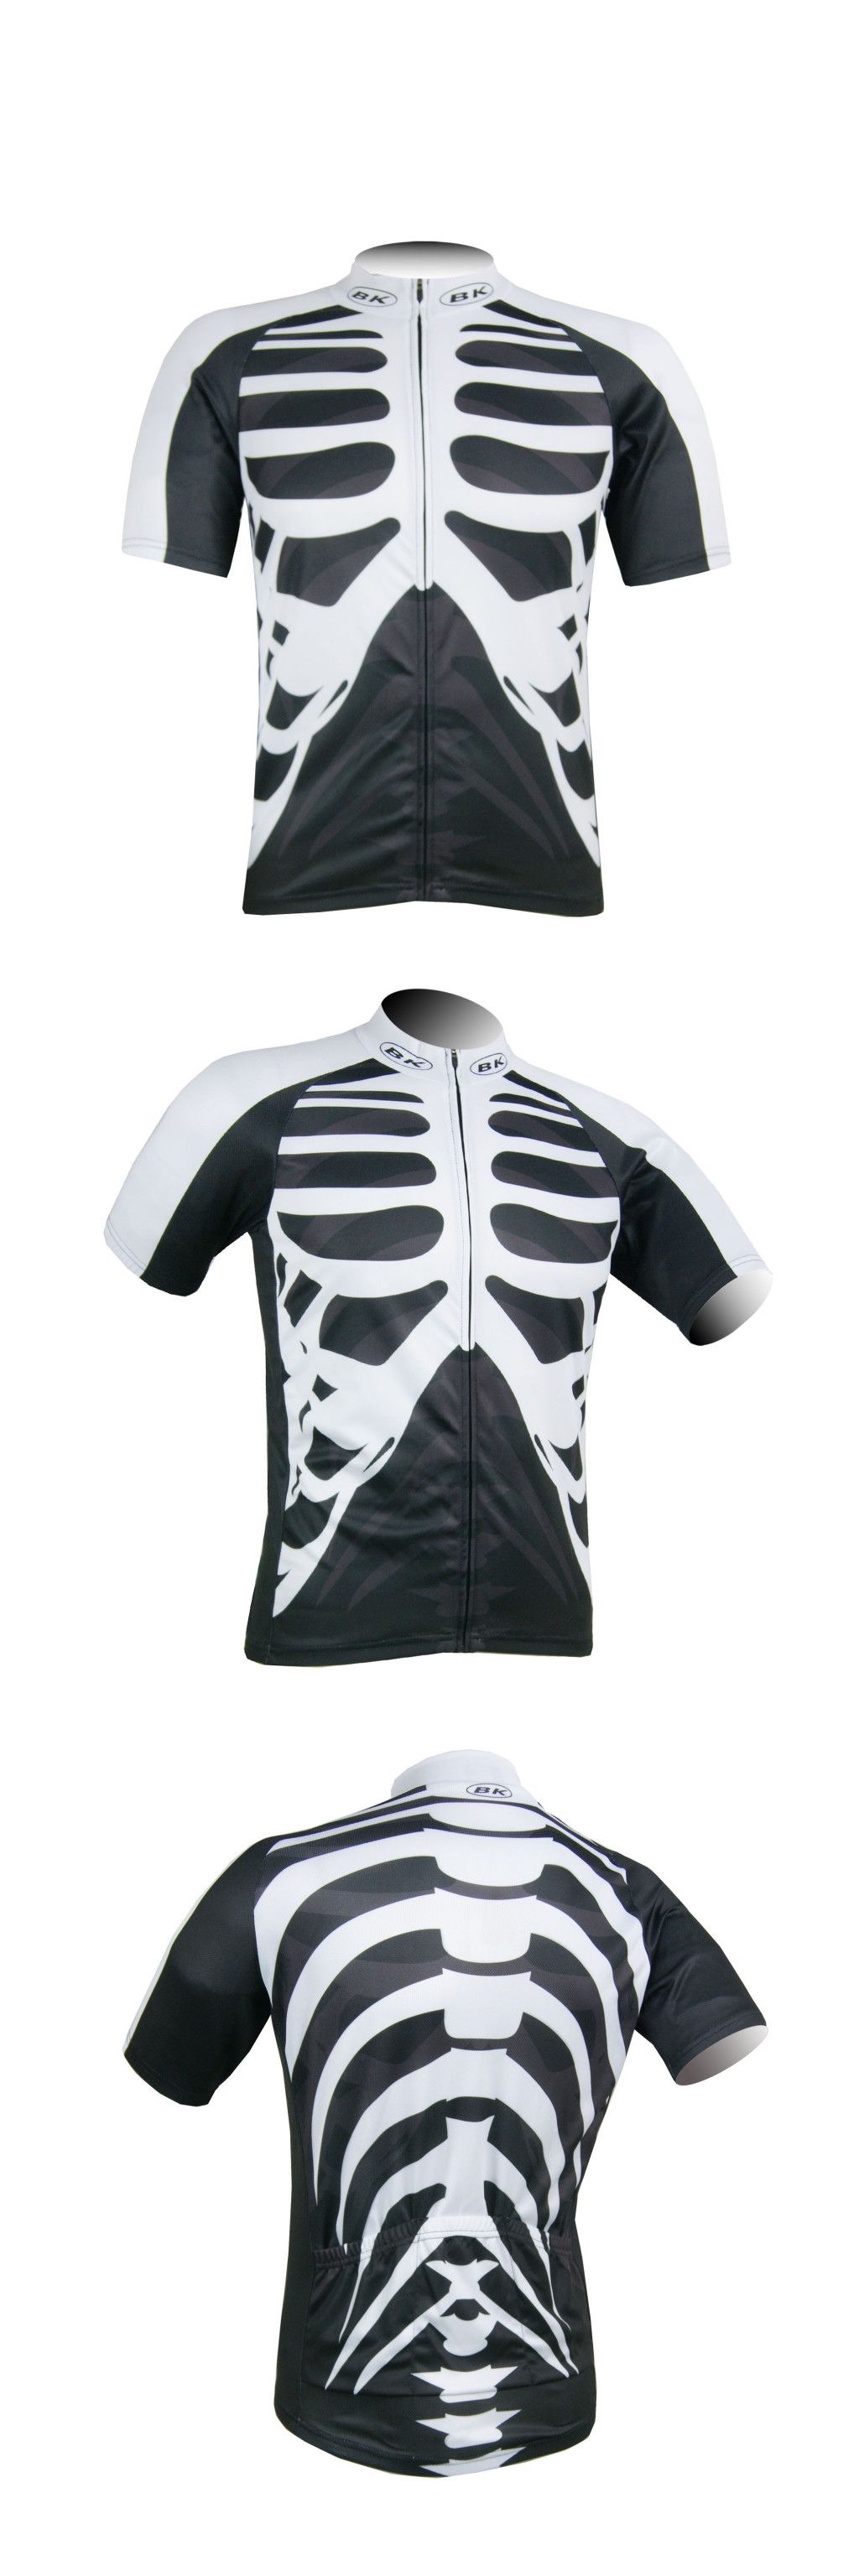   Bicycle Bike Comfortable Outdoor Jersey Shirt Only Bike Bicycle